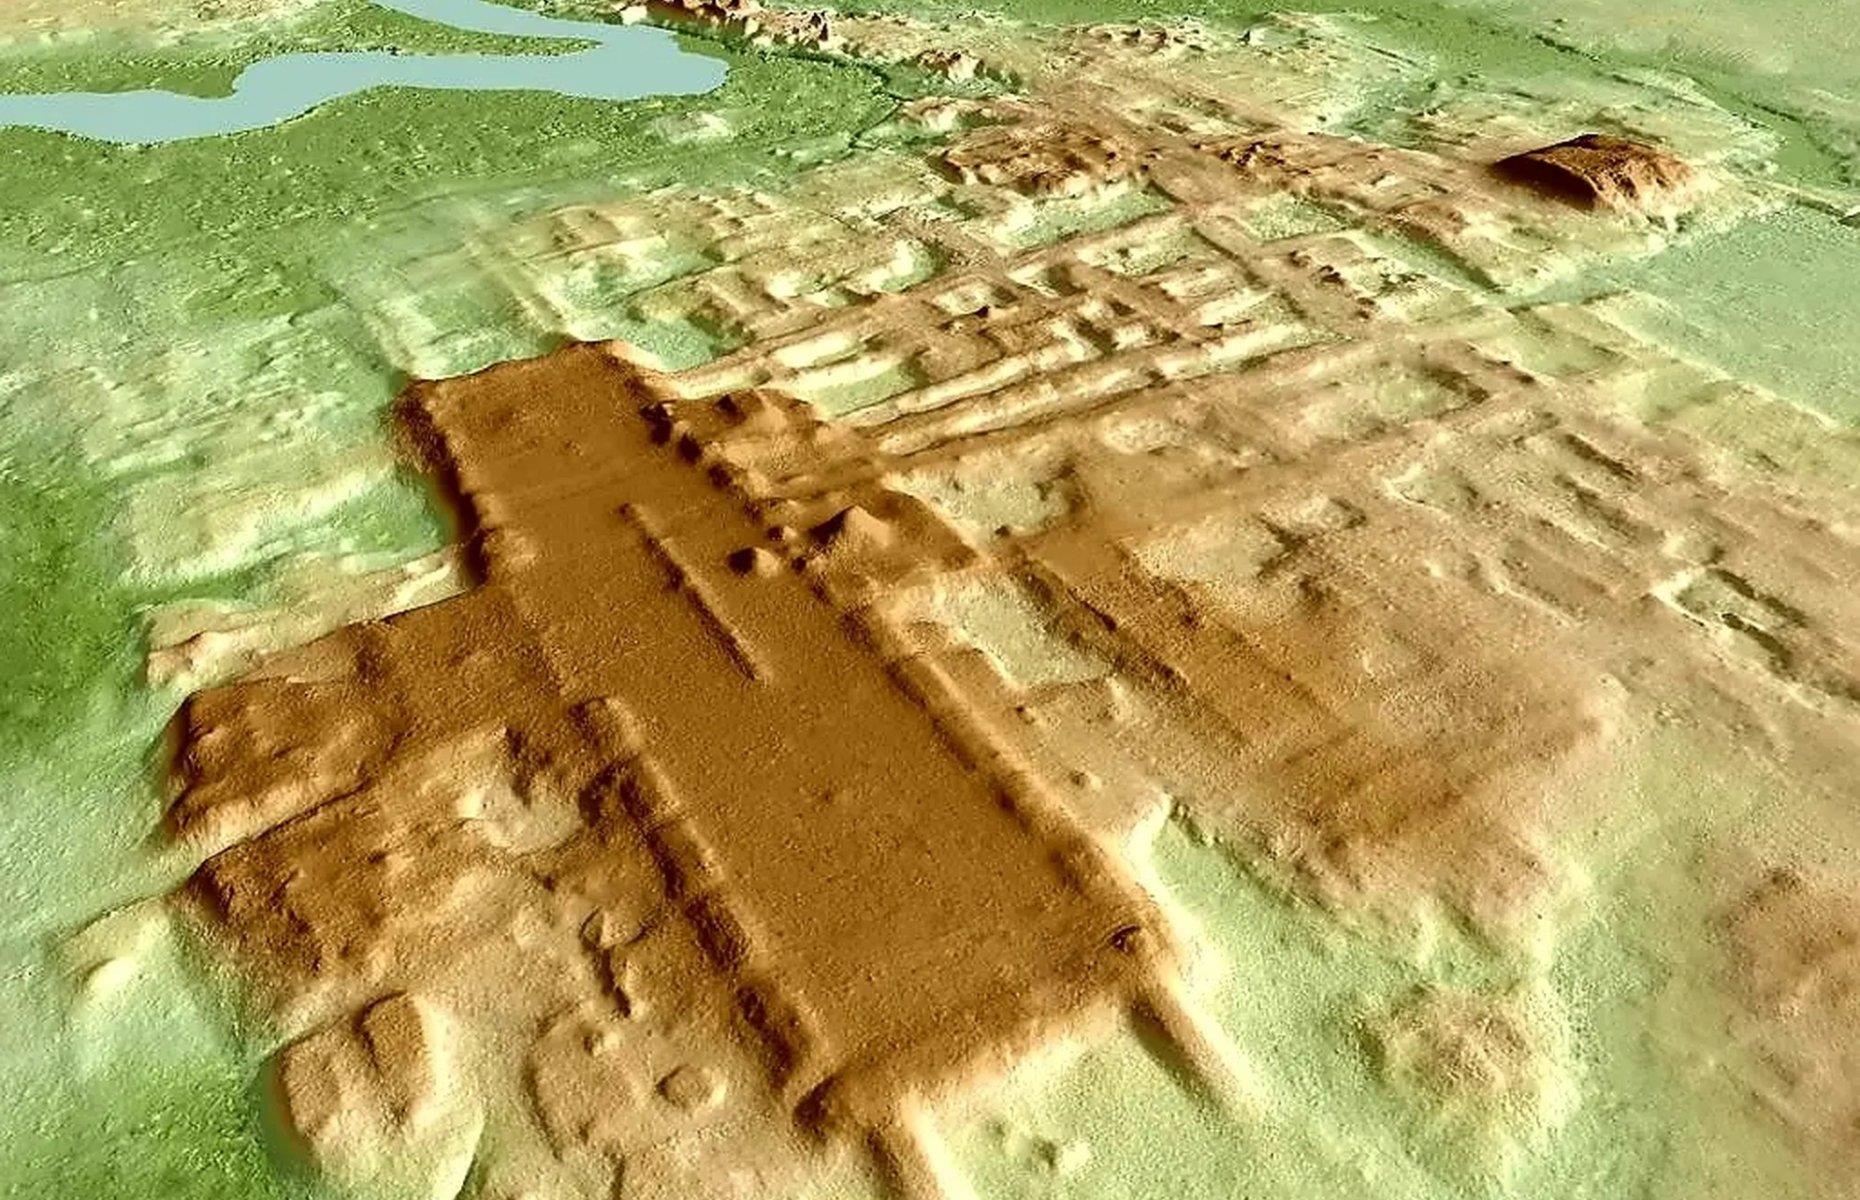 <p>A team of archaeologists were flicking through laser scans from the southern state of Tabasco released by the Mexican government when a strange feature caught their eye. The team hurried to excavate the area, and their suspicions were confirmed.</p>  <p>They’d found a mile-long ceremonial platform that rises 50 feet into the air, built by the Maya around 900 BC, making it the oldest Mayan structure on record. They named their discovery Aguada Fenix and announced it in June 2020.</p>